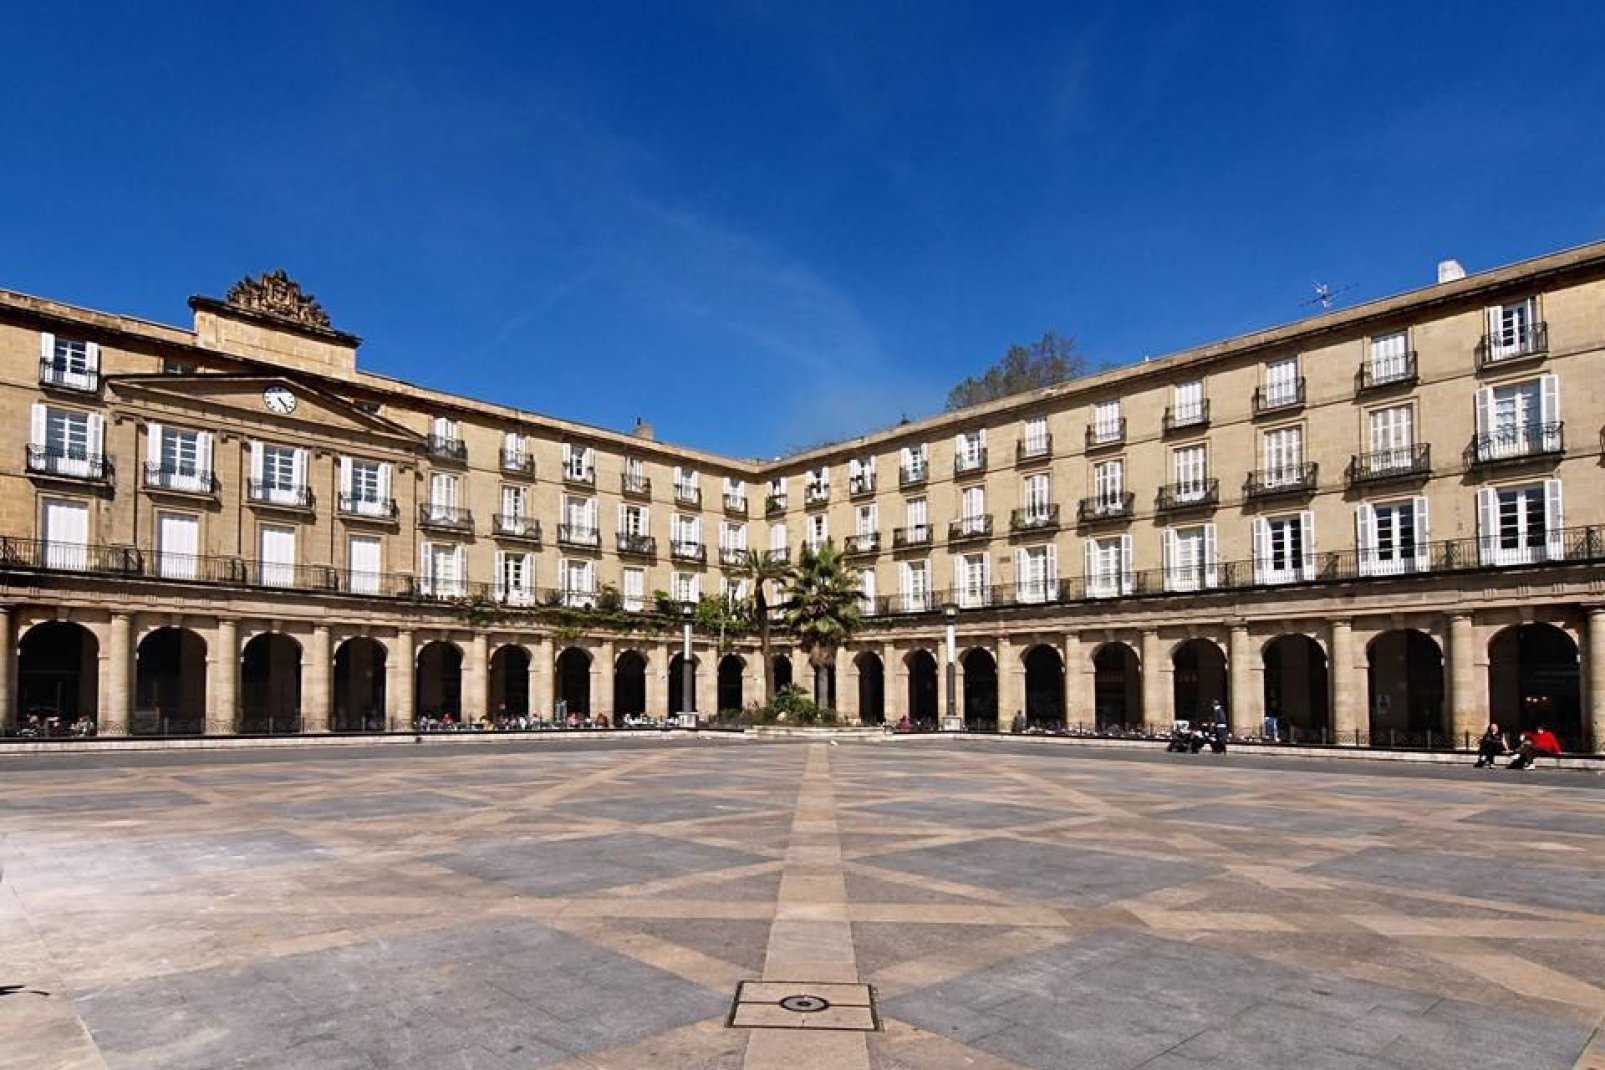 The Royal Academy of the Basque Language that looks over Plaza Nueva is a beautiful example of Belle Époque architecture.